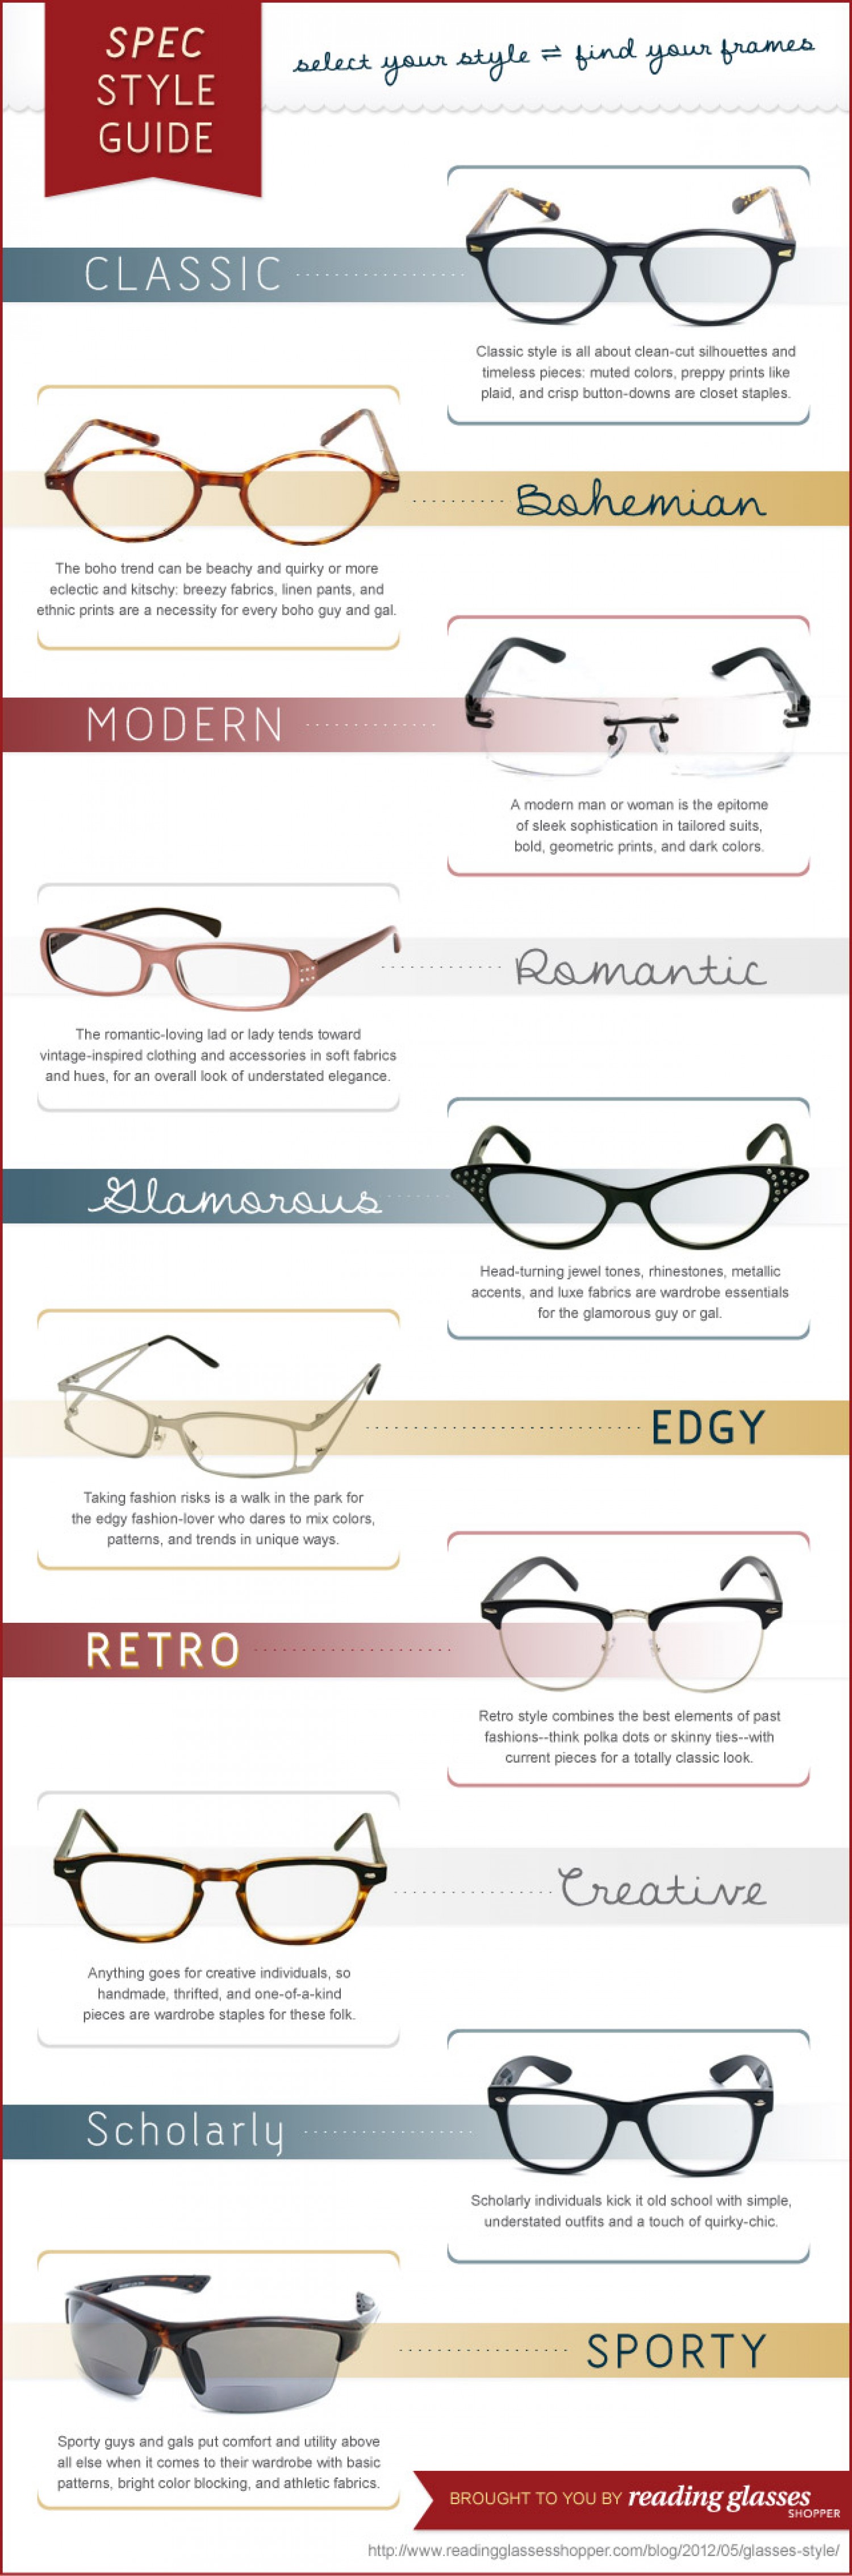 spec-style-guide-by-reading-glasses-shopper_5029189705153_w1500